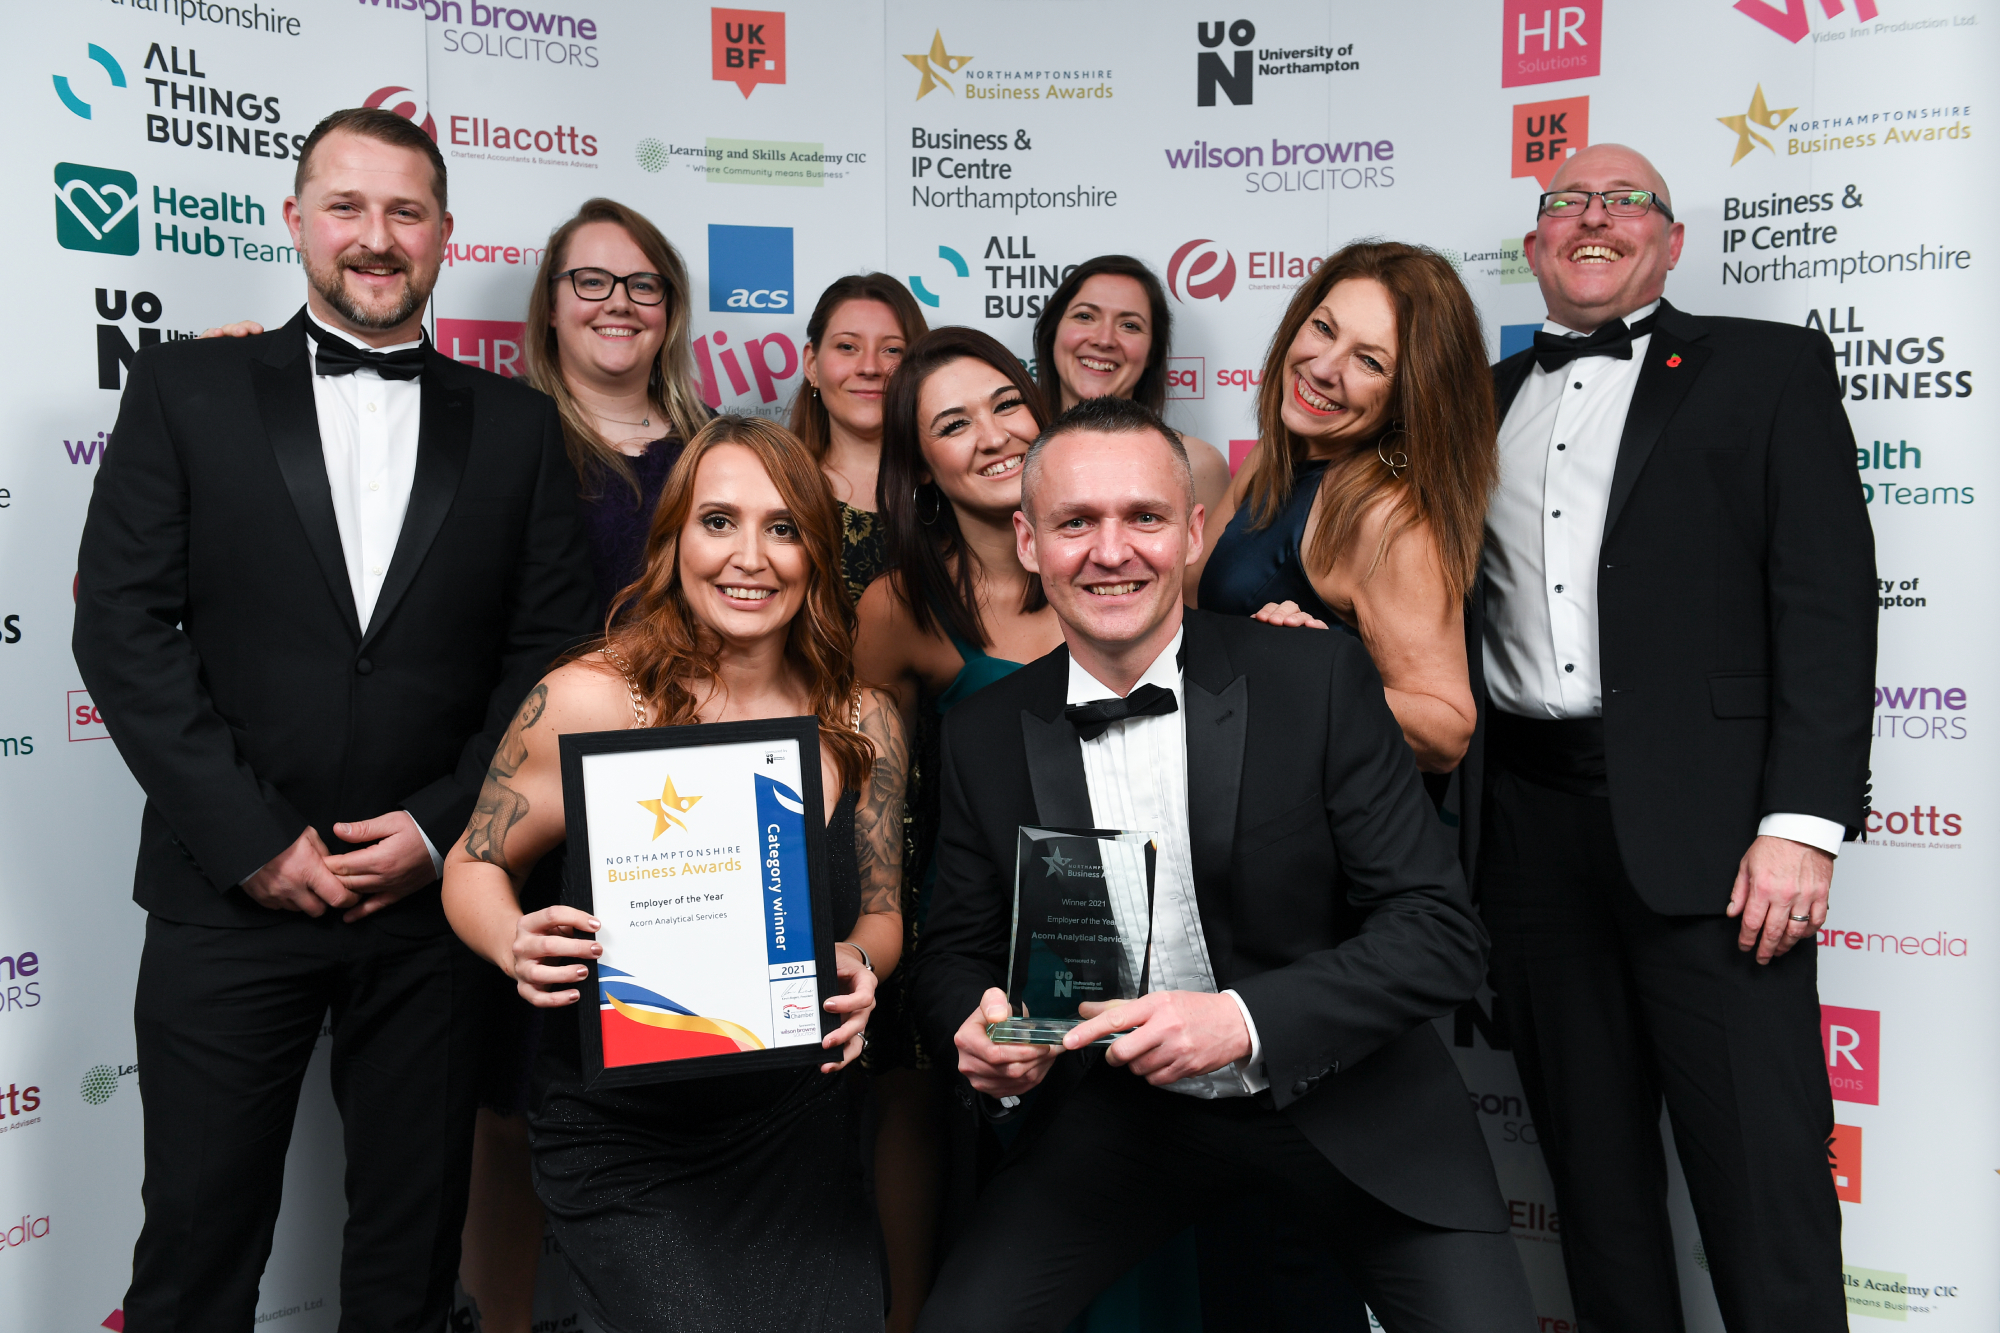  Asbestos consultancy named Employer of the Year